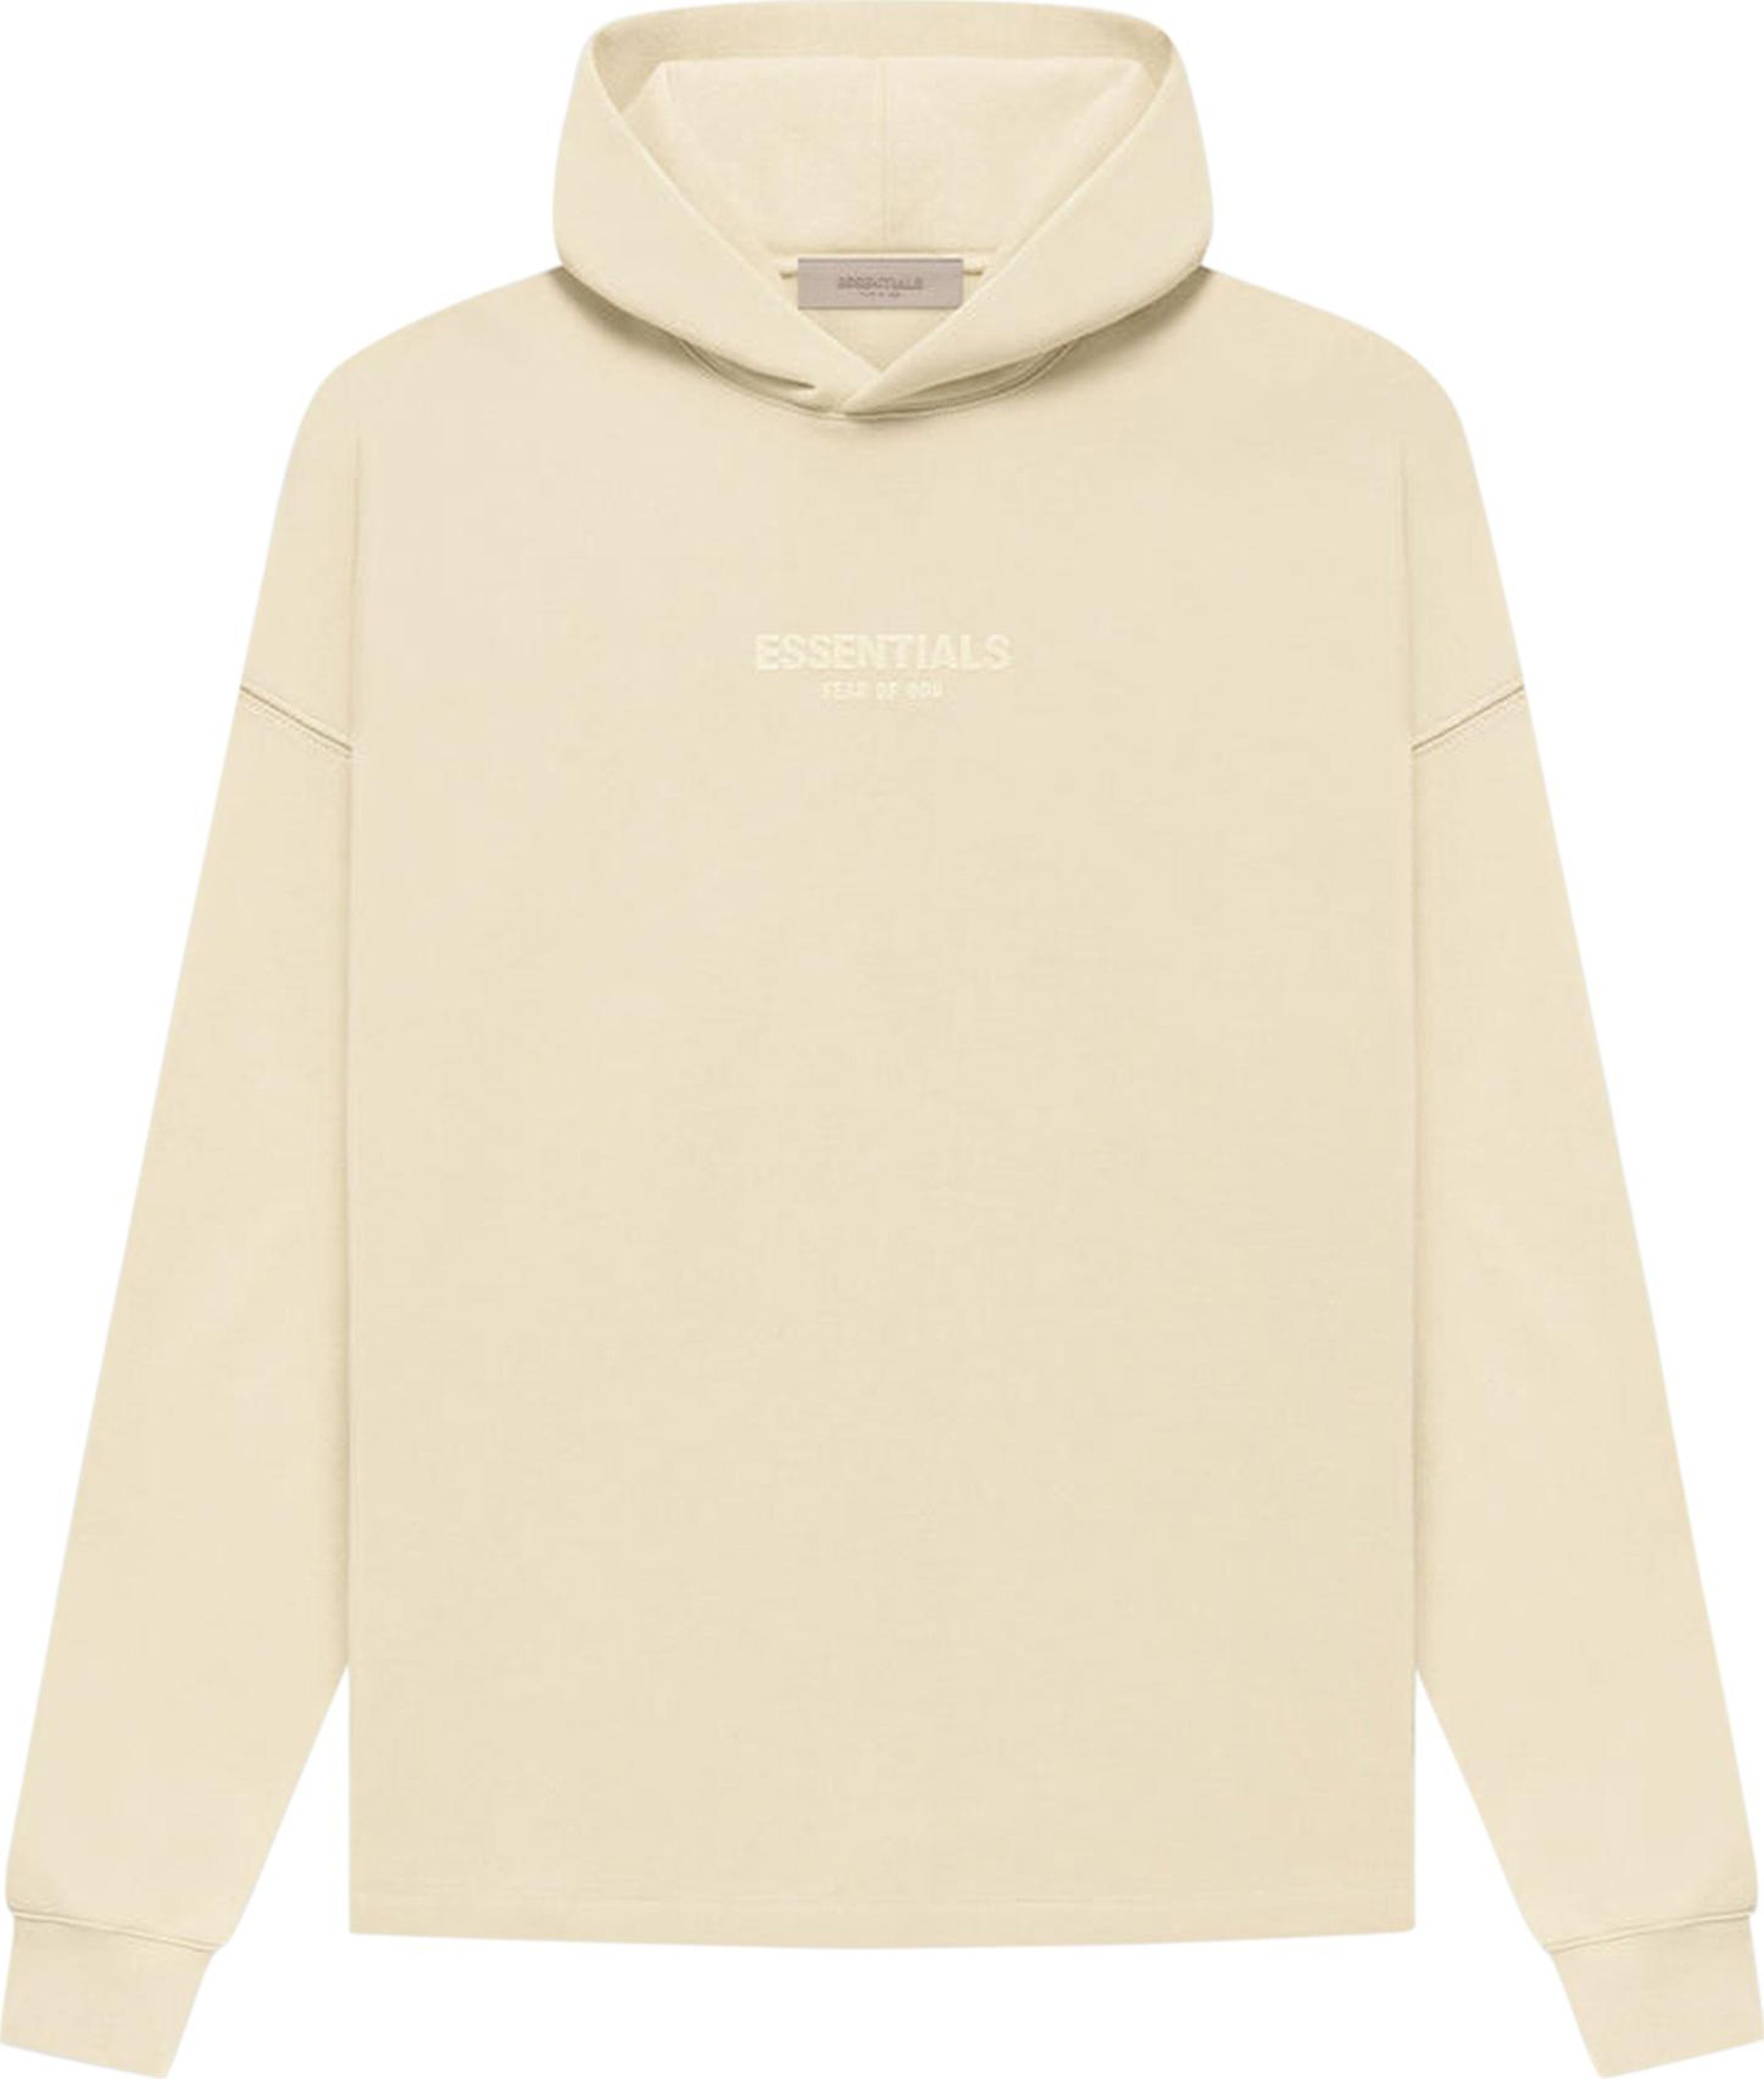 Buy Fear of God Essentials Relaxed Hoodie 'Egg Shell' - 192SU222090F | GOAT